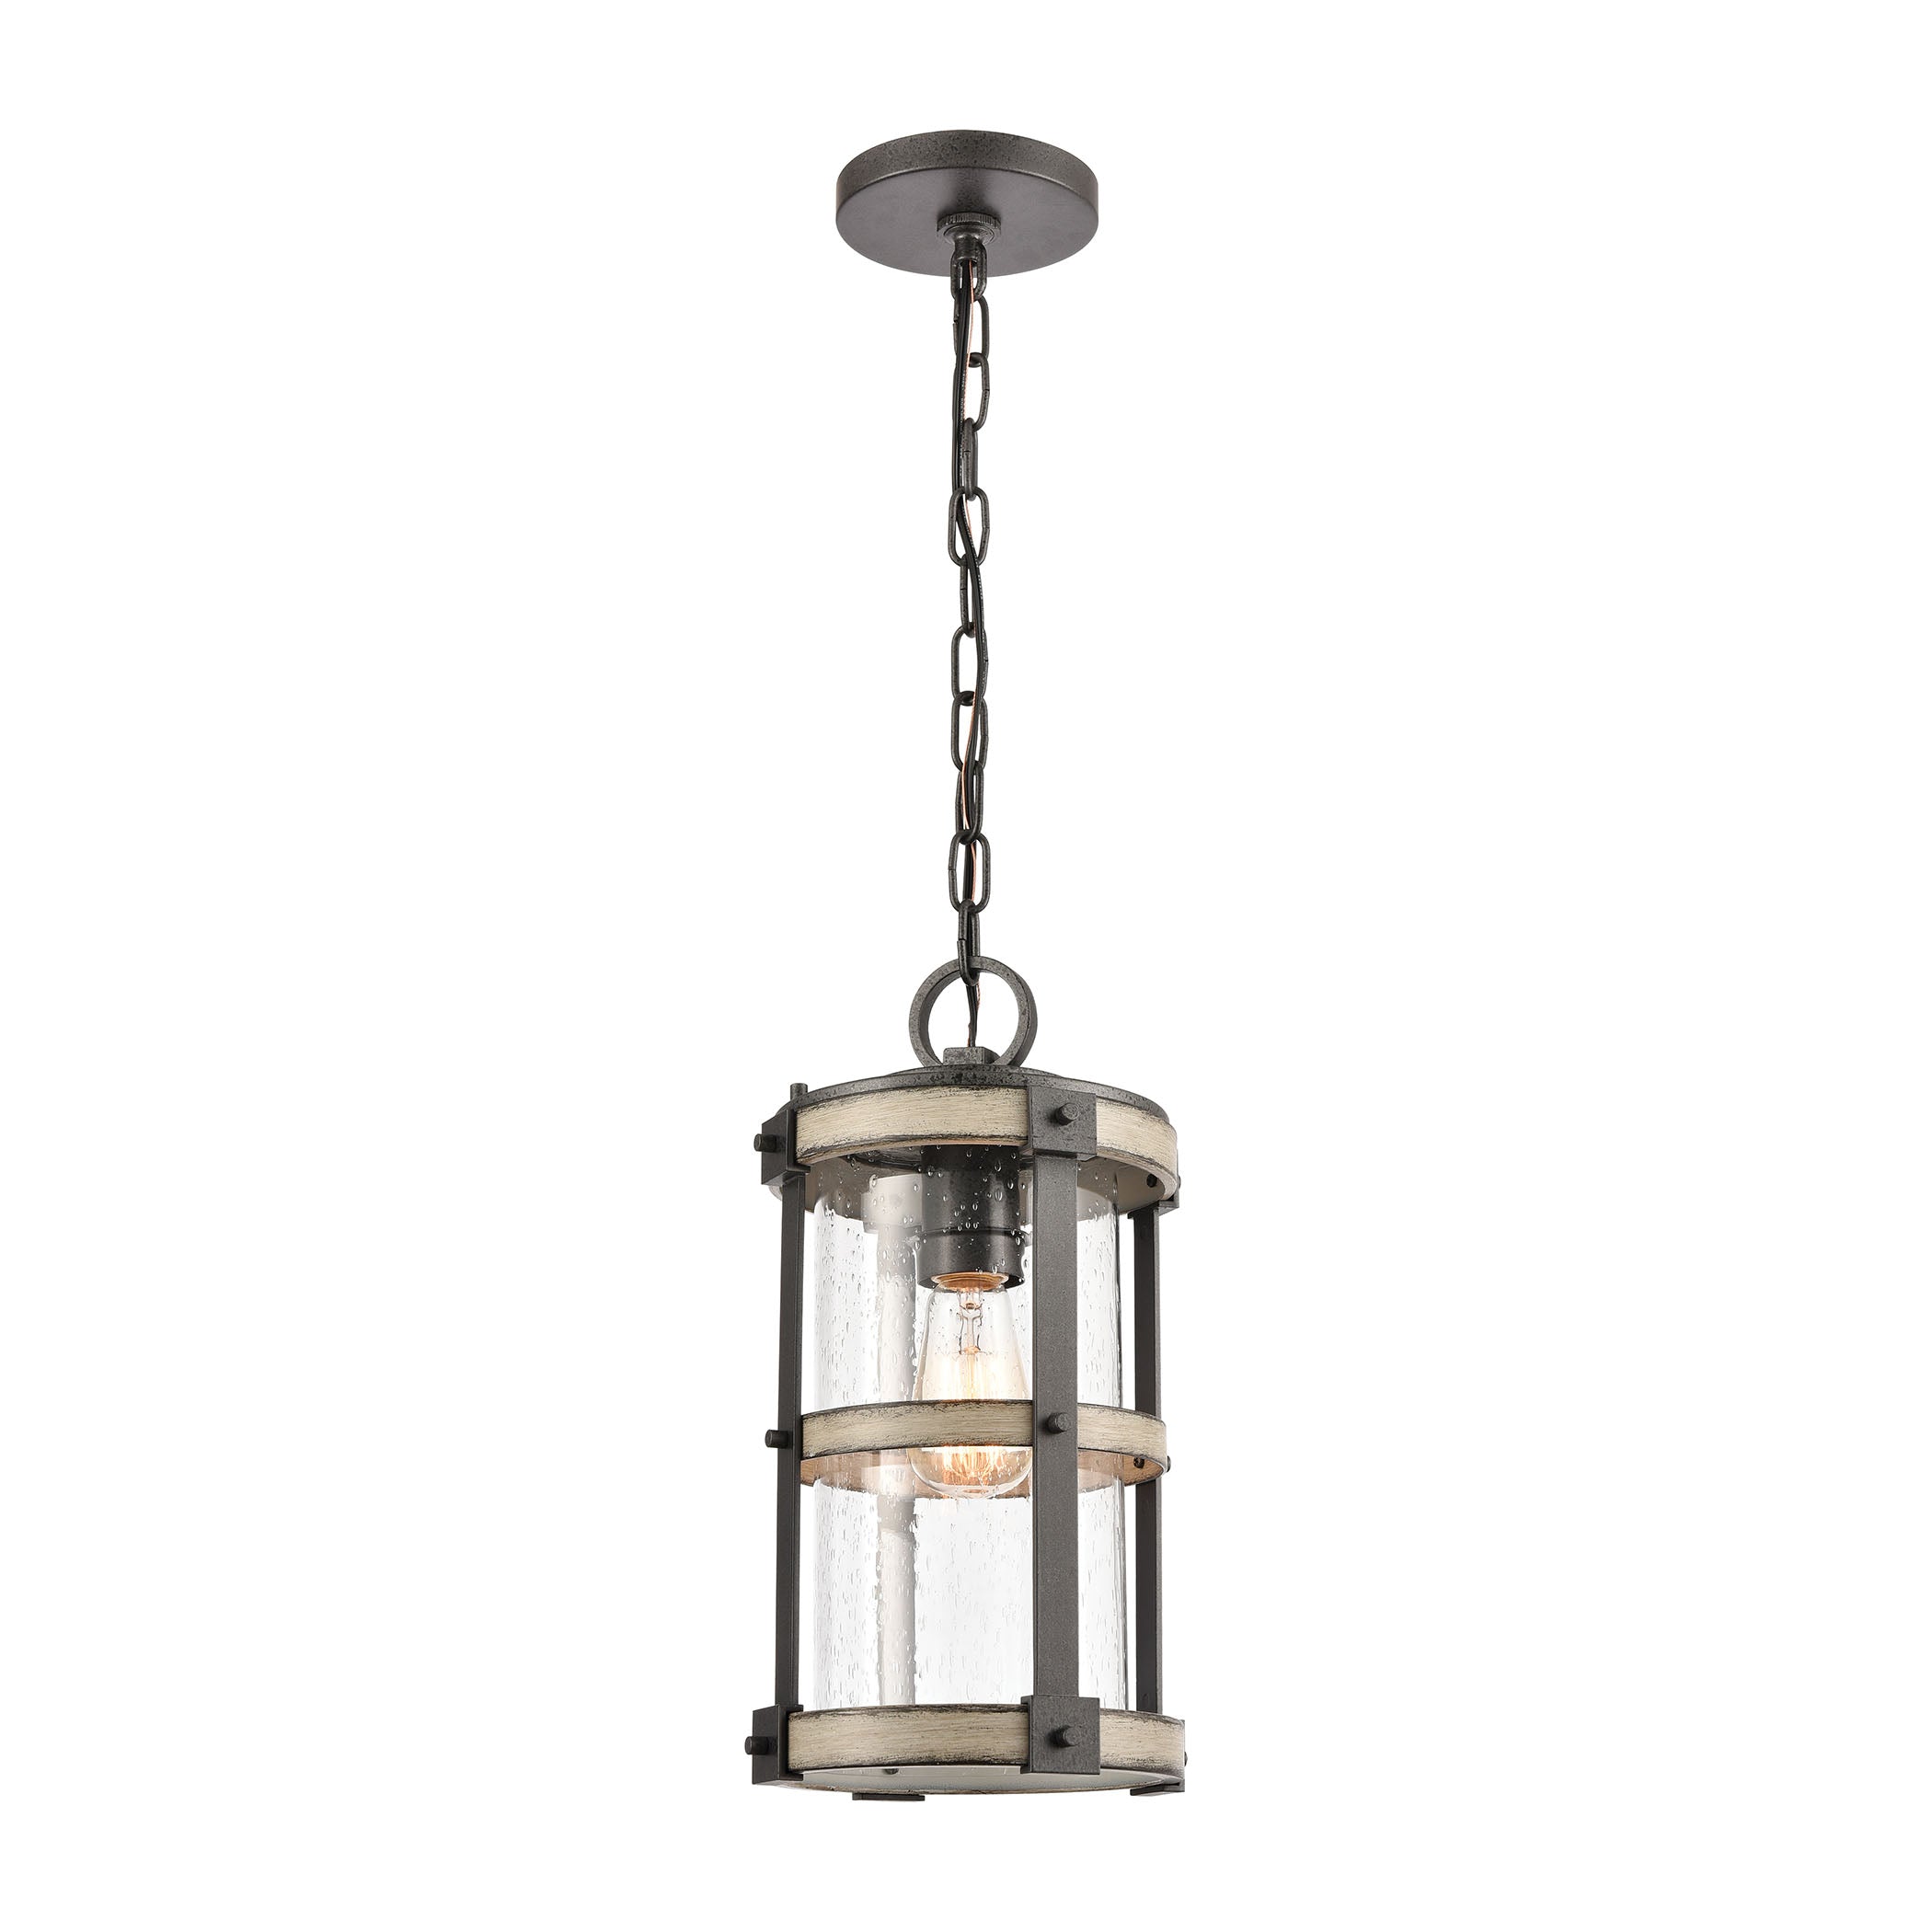 ELK Lighting 89147/1 Crenshaw 1-Light Outdoor Pendant in Anvil Iron and Distressed Antique Graywood with Seedy Glass